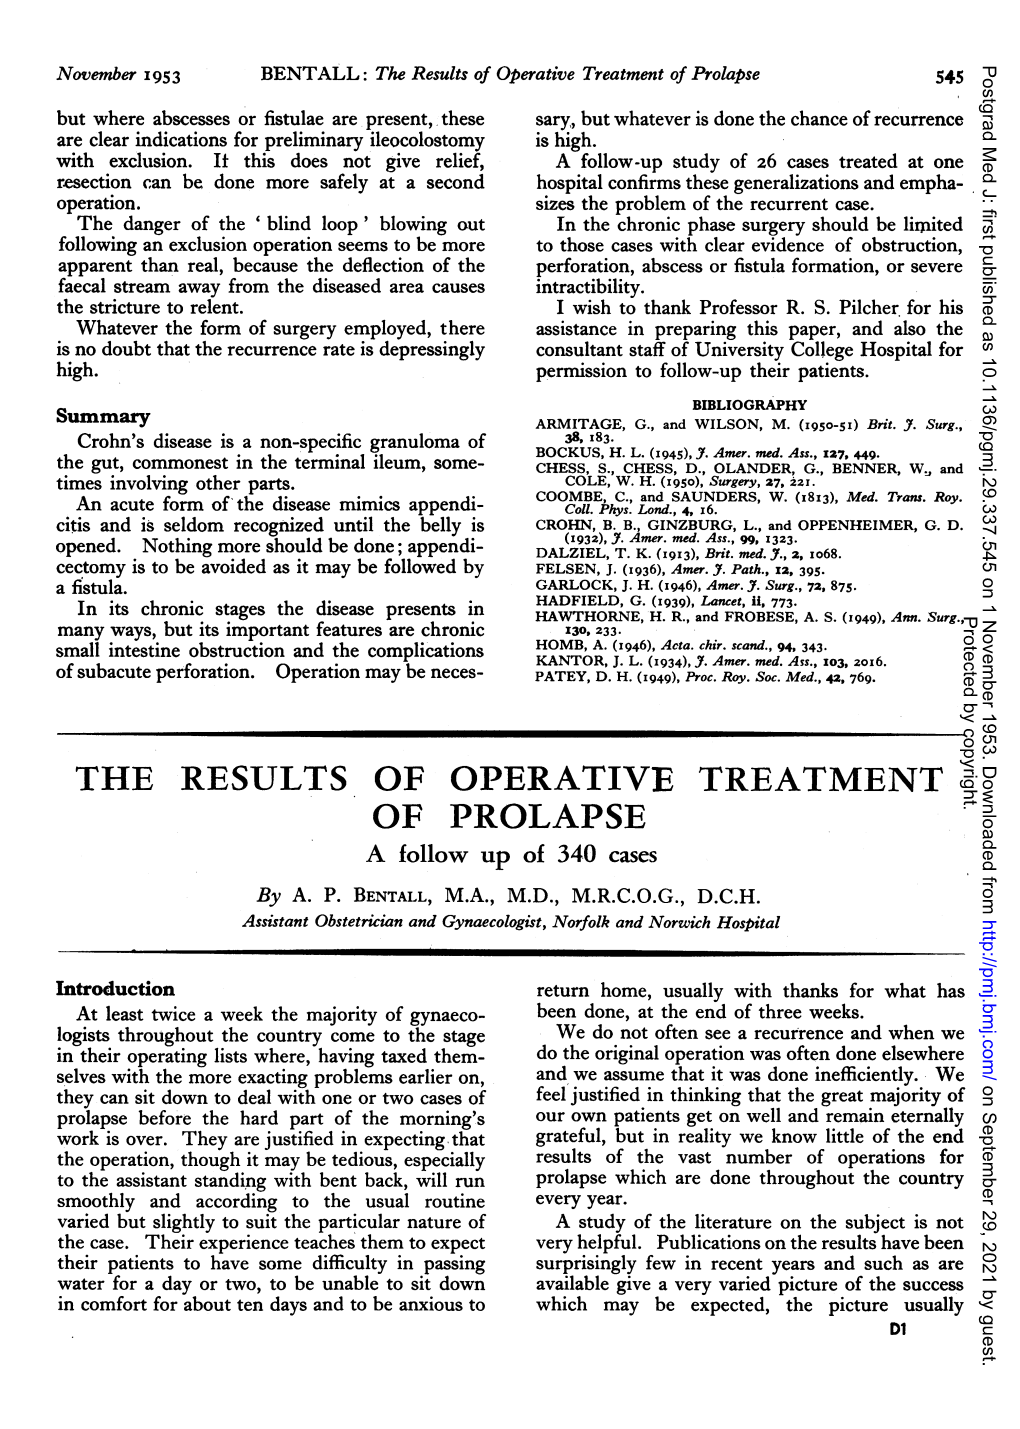 The Results of Operative Treatment of Prolapse 545 Postgrad Med J: First Published As 10.1136/Pgmj.29.337.545 on 1 November 1953